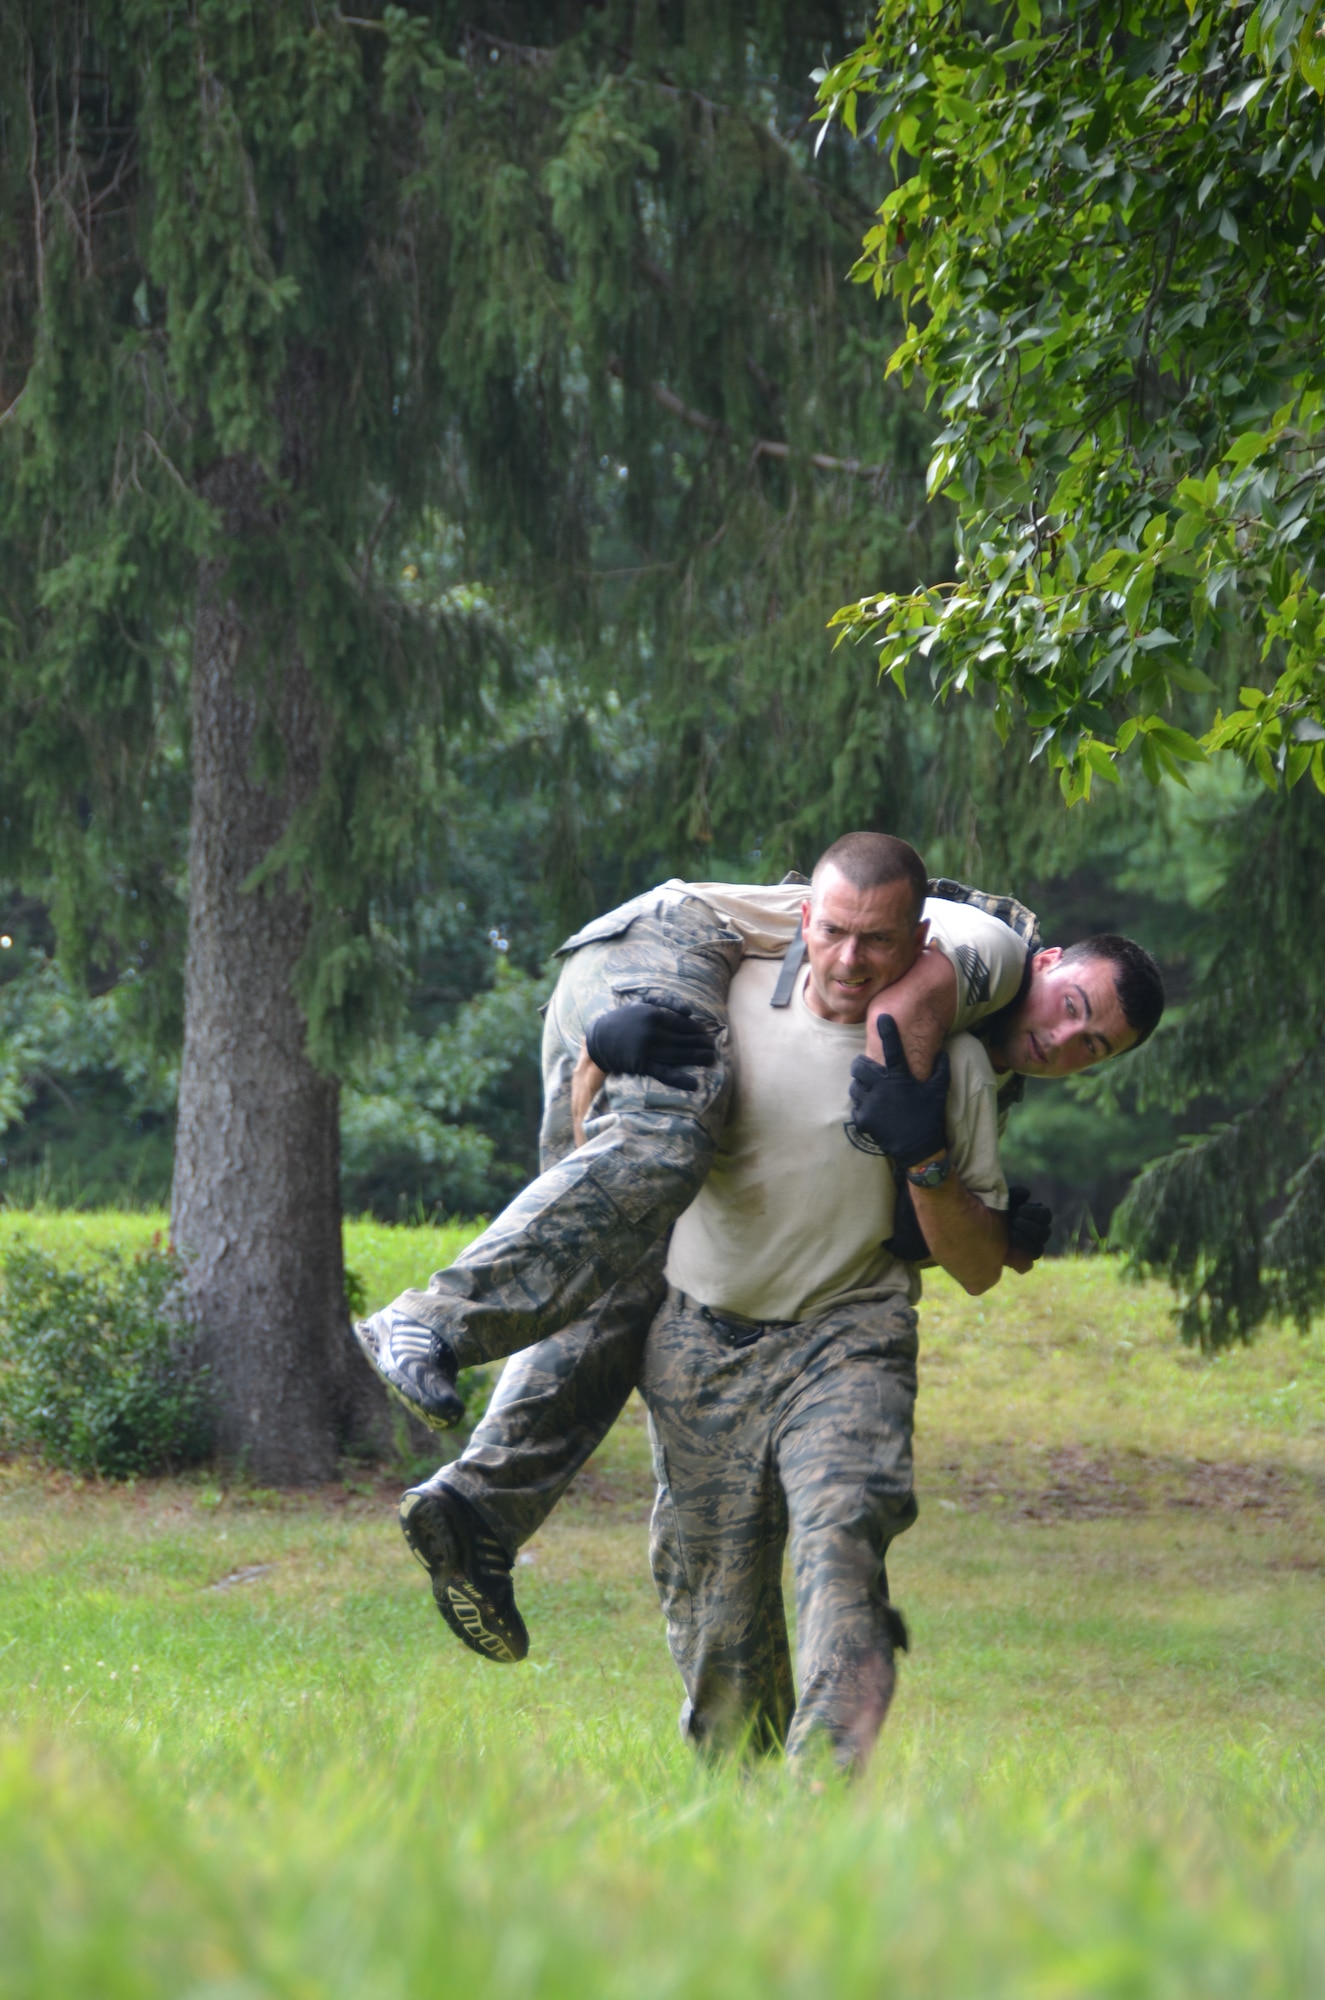 Senior Airman Jason Dufour carries Senior Airman Francis Gelada as part of just one of a myriad of physical challenges at the West Hartford Reservoir in West Hartford, Conn. during the ninth annual Connecticut SWAT Challenge Aug. 22, 2013. The team from the 103rd Security Forces Squadron came in eighth place overall, besting 20 other regional teams from across New England. (U.S. Air National Guard Photo by Maj. Jefferson S. Heiland)